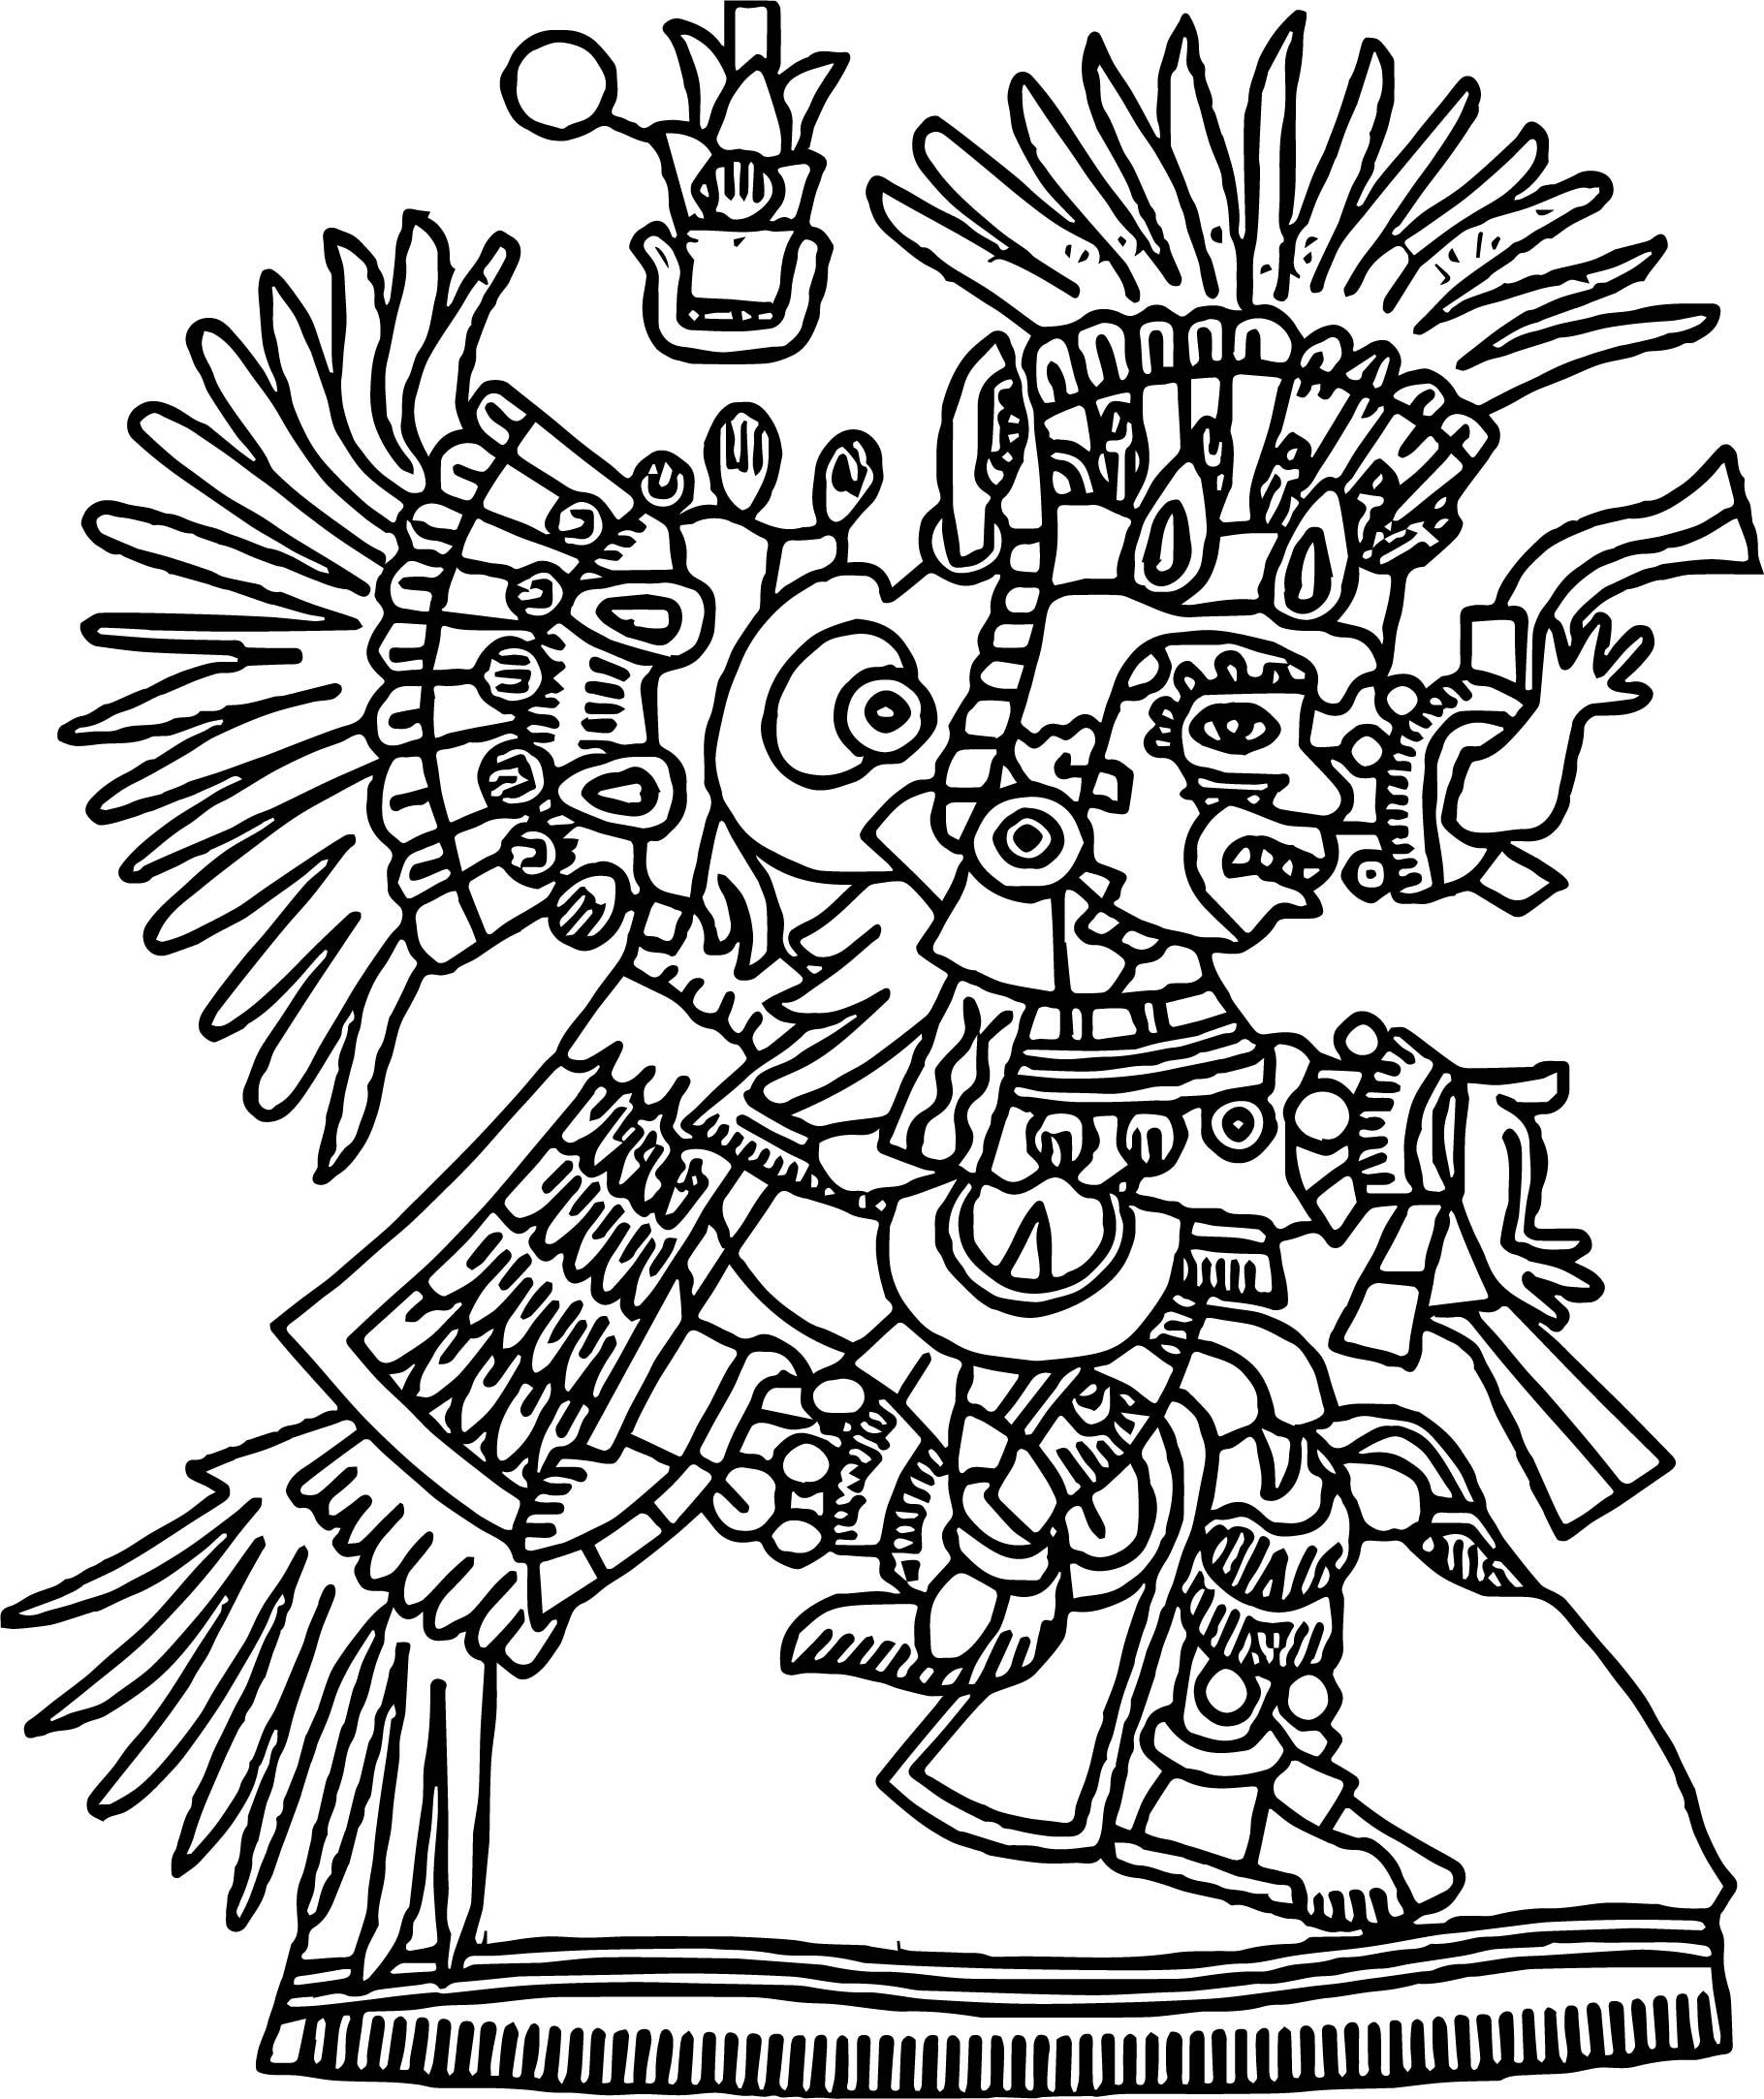 Aztec Coloring Pages Pdf to Print - Free Aztec Coloring Pages